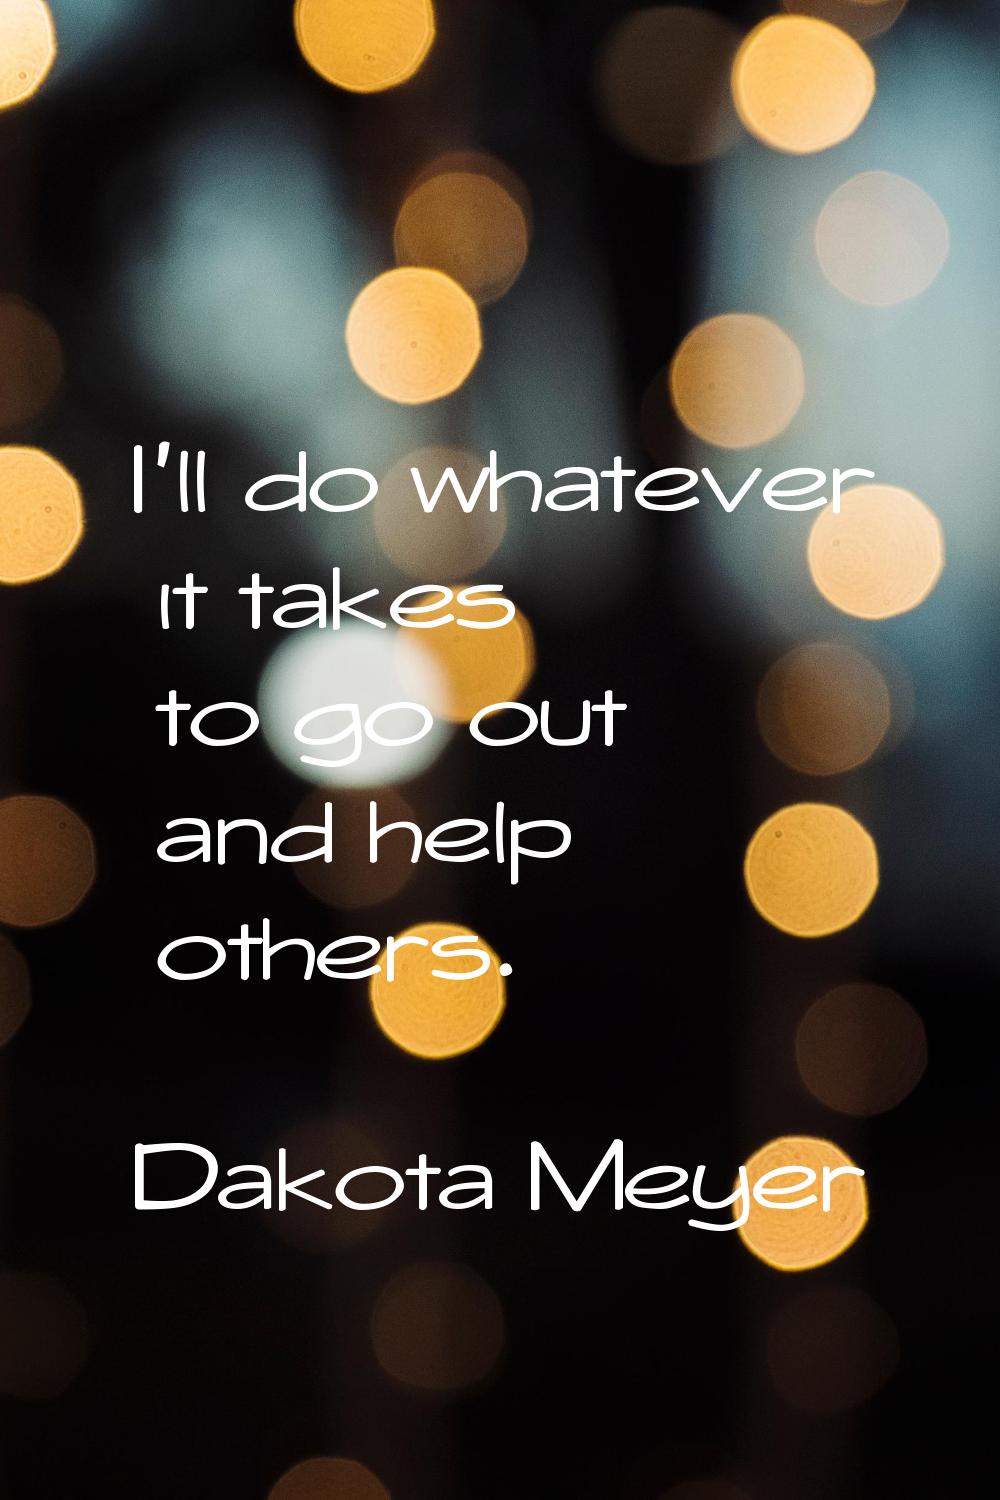 I'll do whatever it takes to go out and help others.